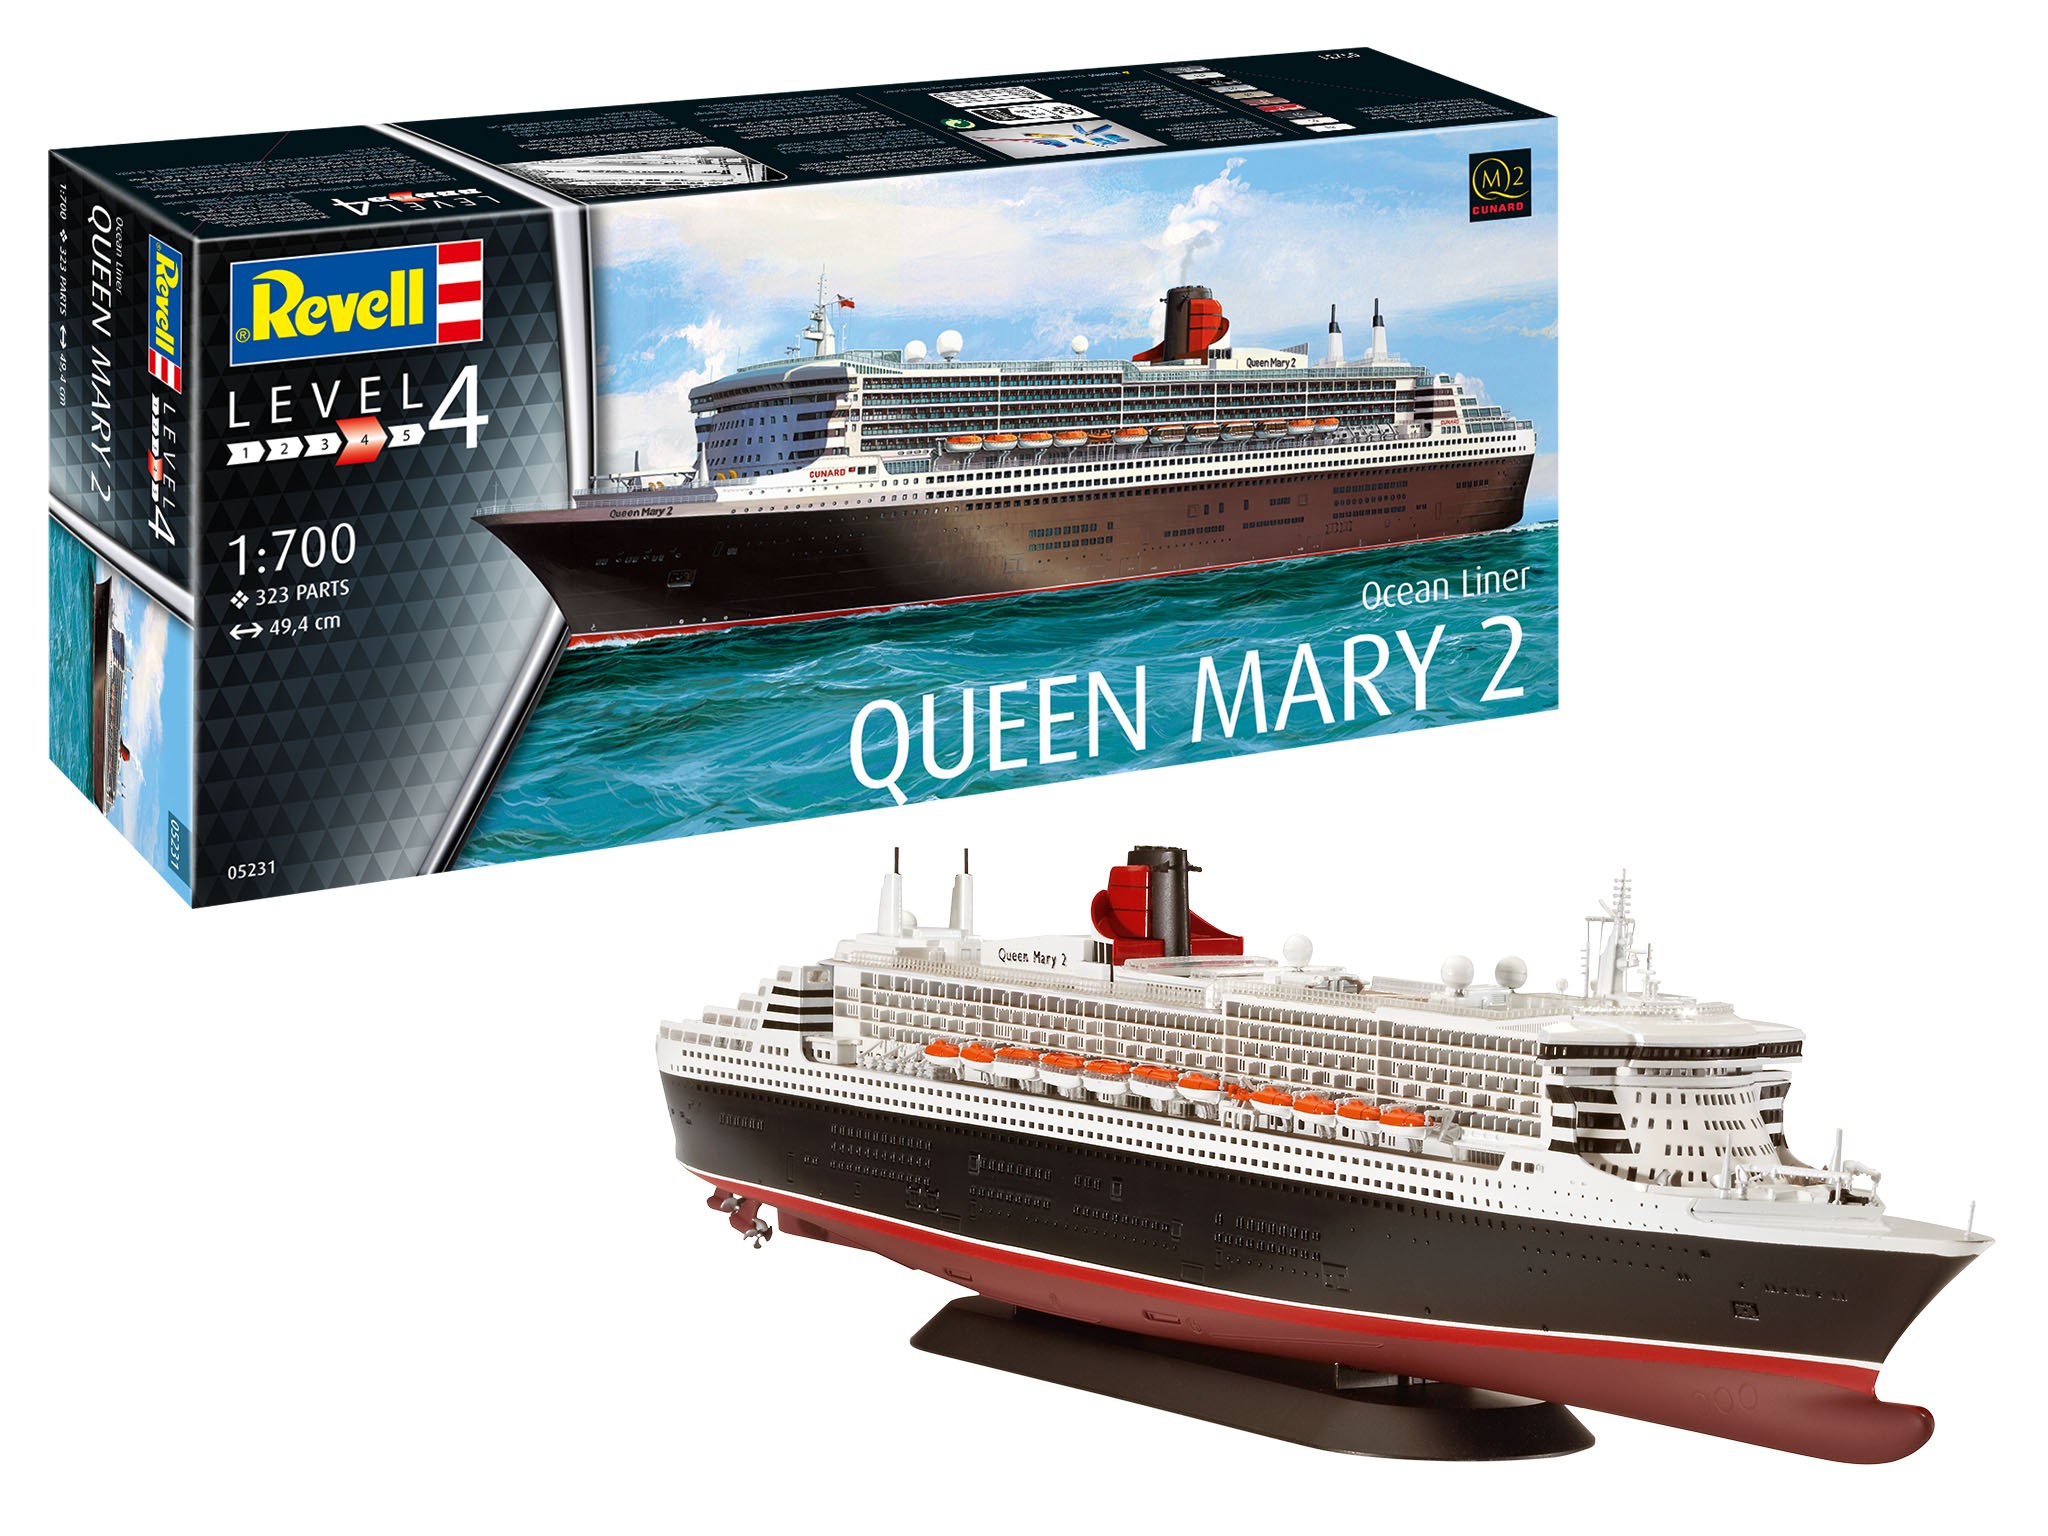 Revell 05231 Queen Mary 2  1/700